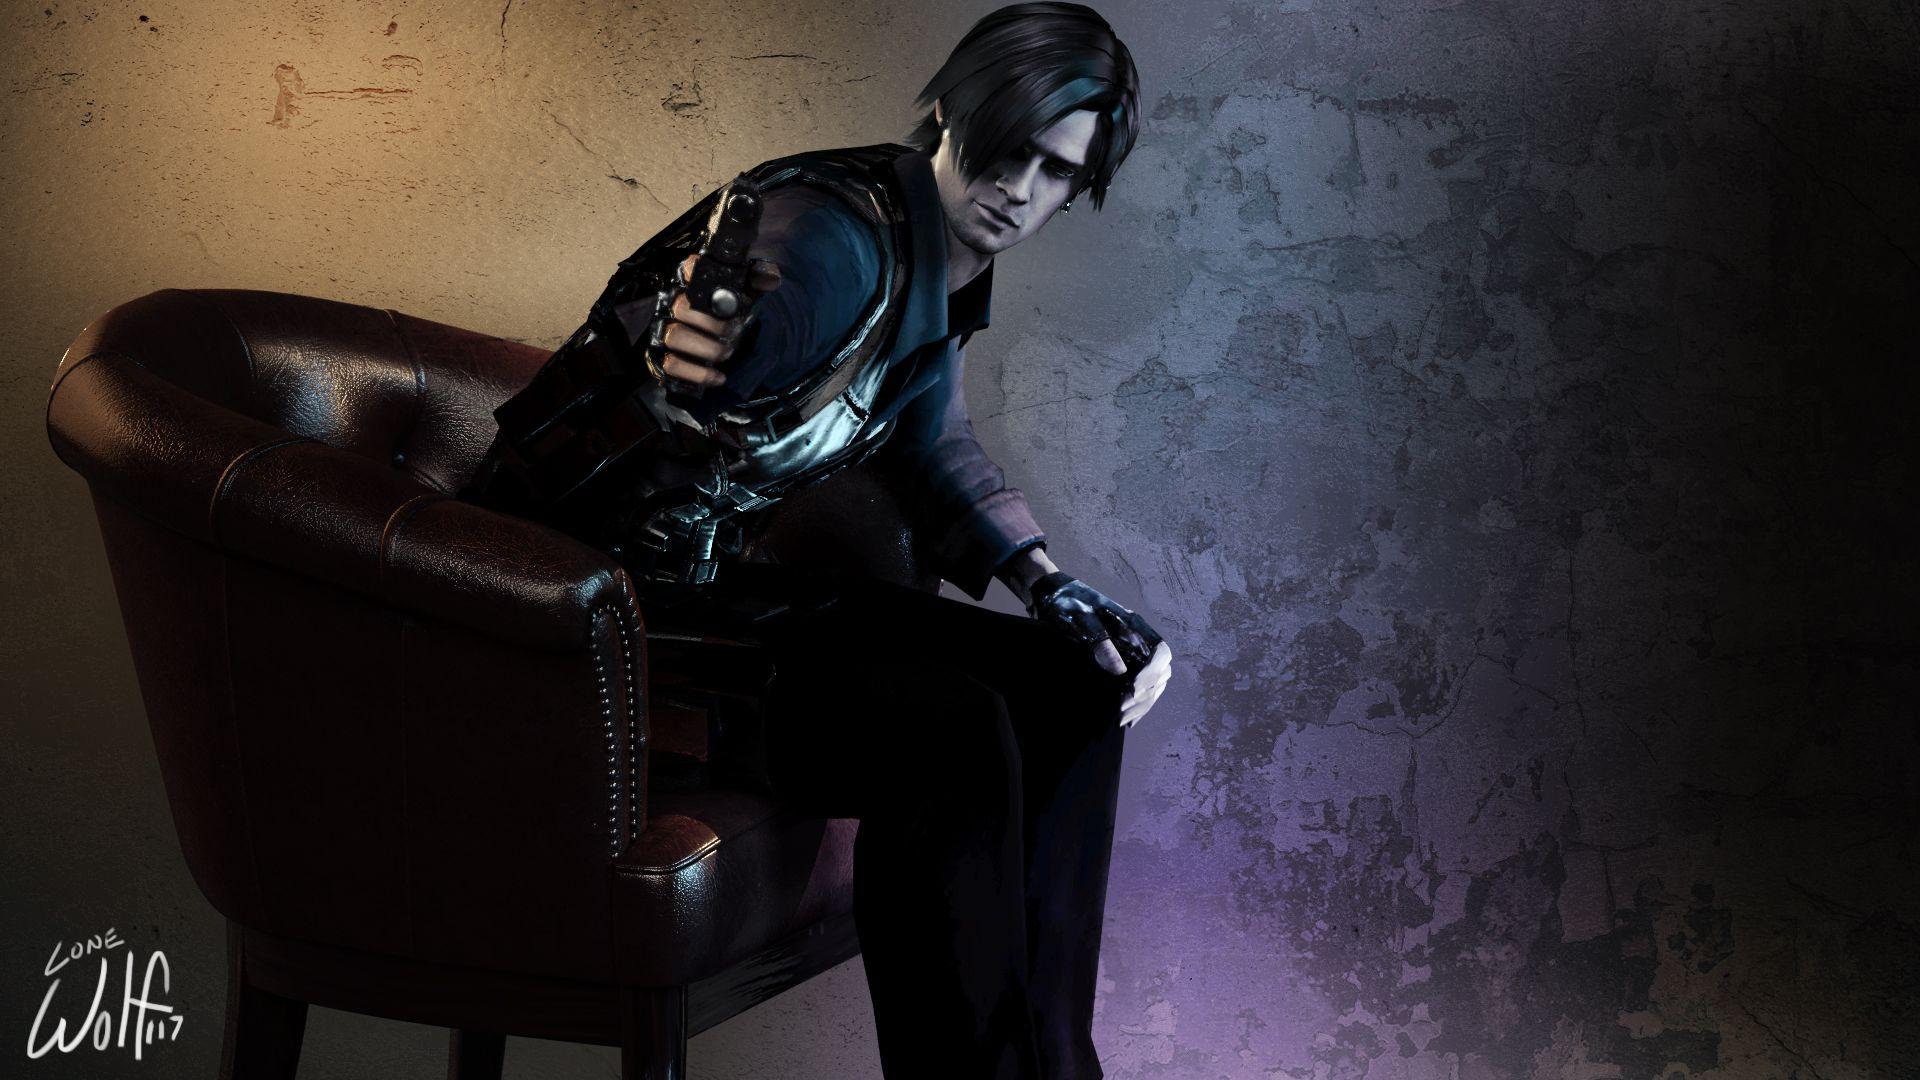 Leon S Kennedy Wallpapers Top Free Leon S Kennedy Backgrounds Wallpaperaccess 6133